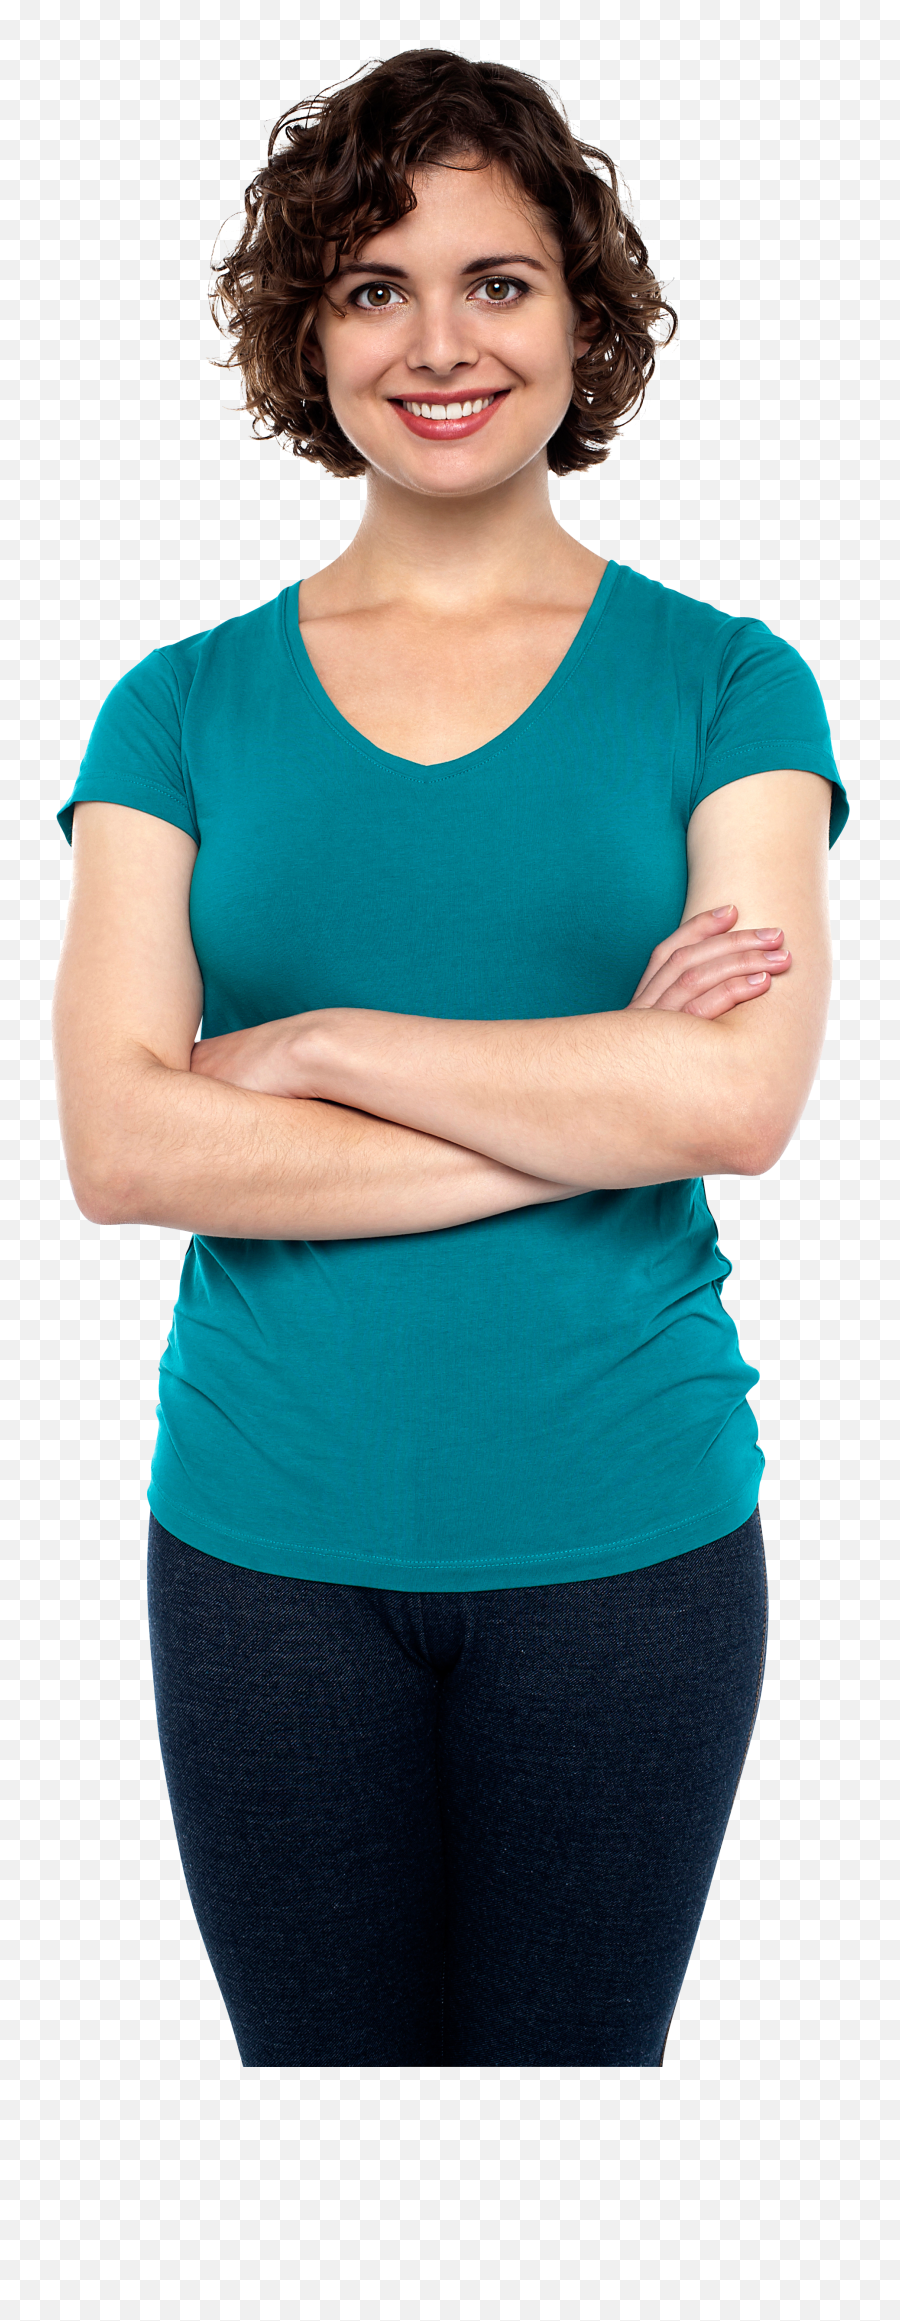 Standing Women Png Background Photo Play - Woman Standing Middle Age,Woman Standing Png